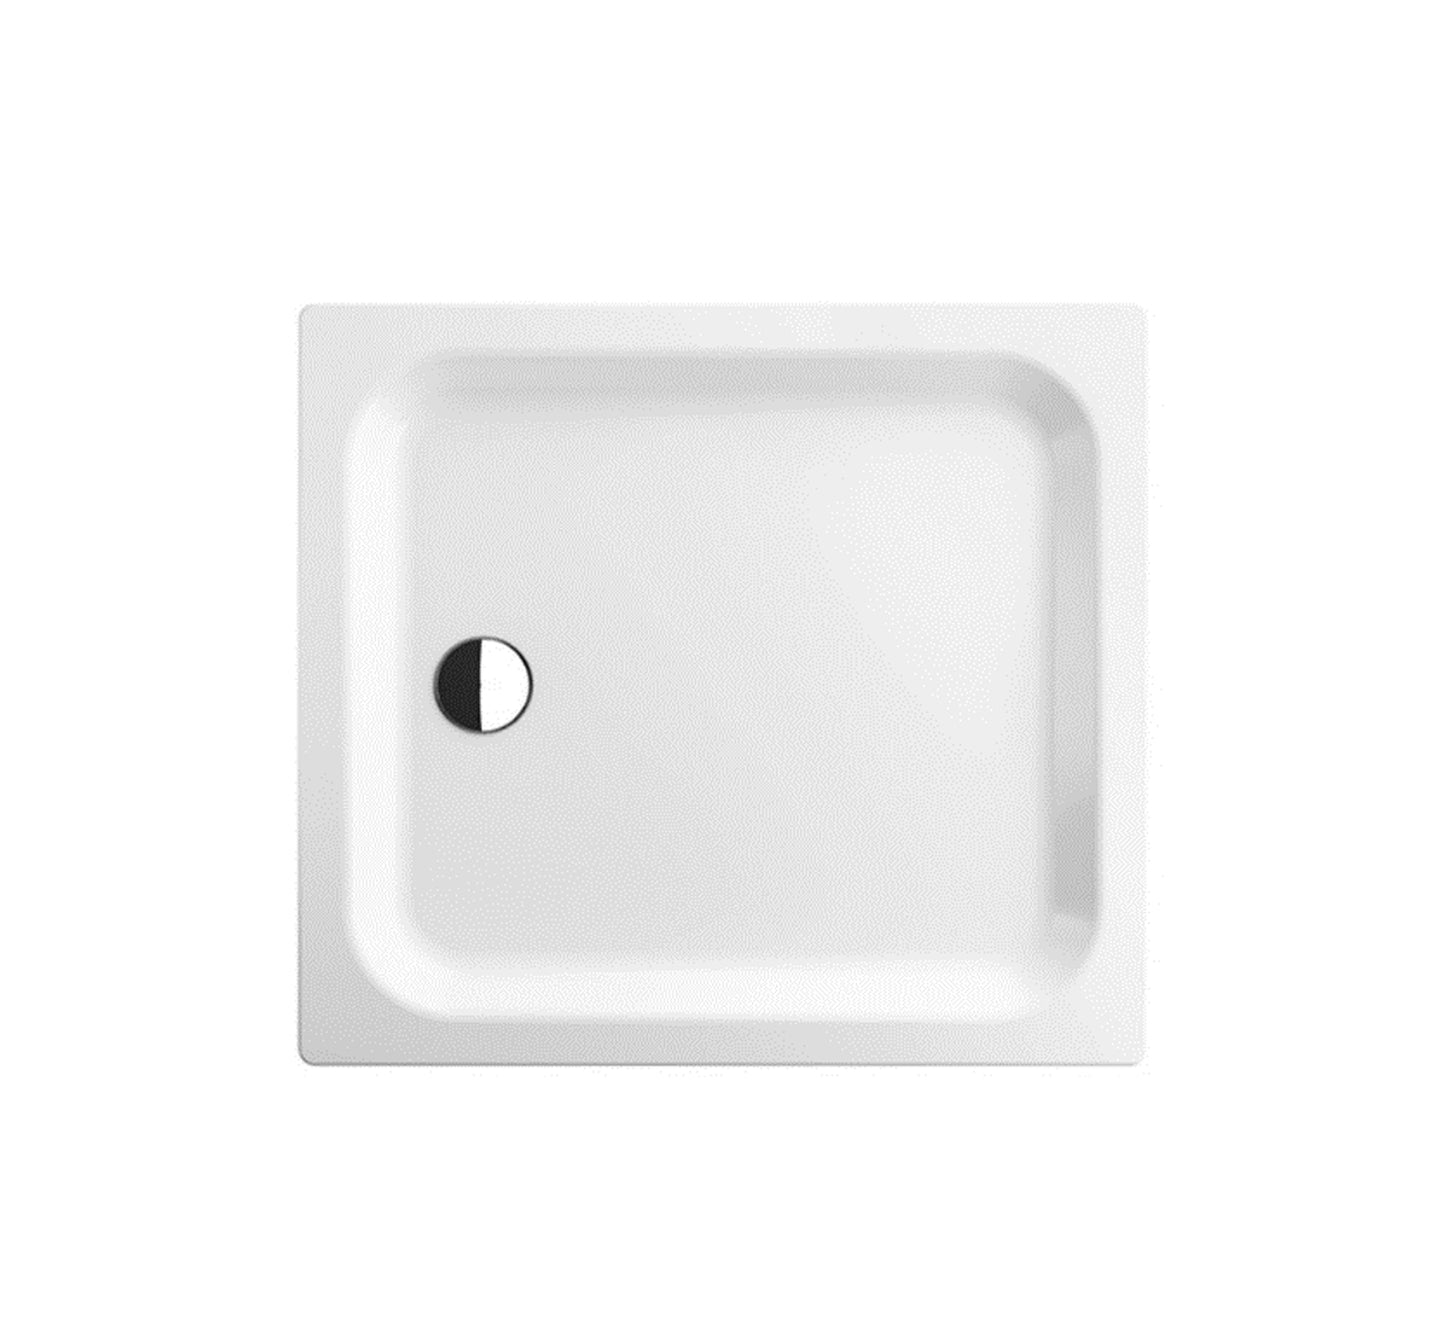 COMBO: HOESCH PURE DELTA 90 SQUARE SHOWER TRAY 1000X1000X90 ACRYLIC WHITE COMBO, HOESCH PURE DRAIN 90 MM CHROME PLATED - 50329